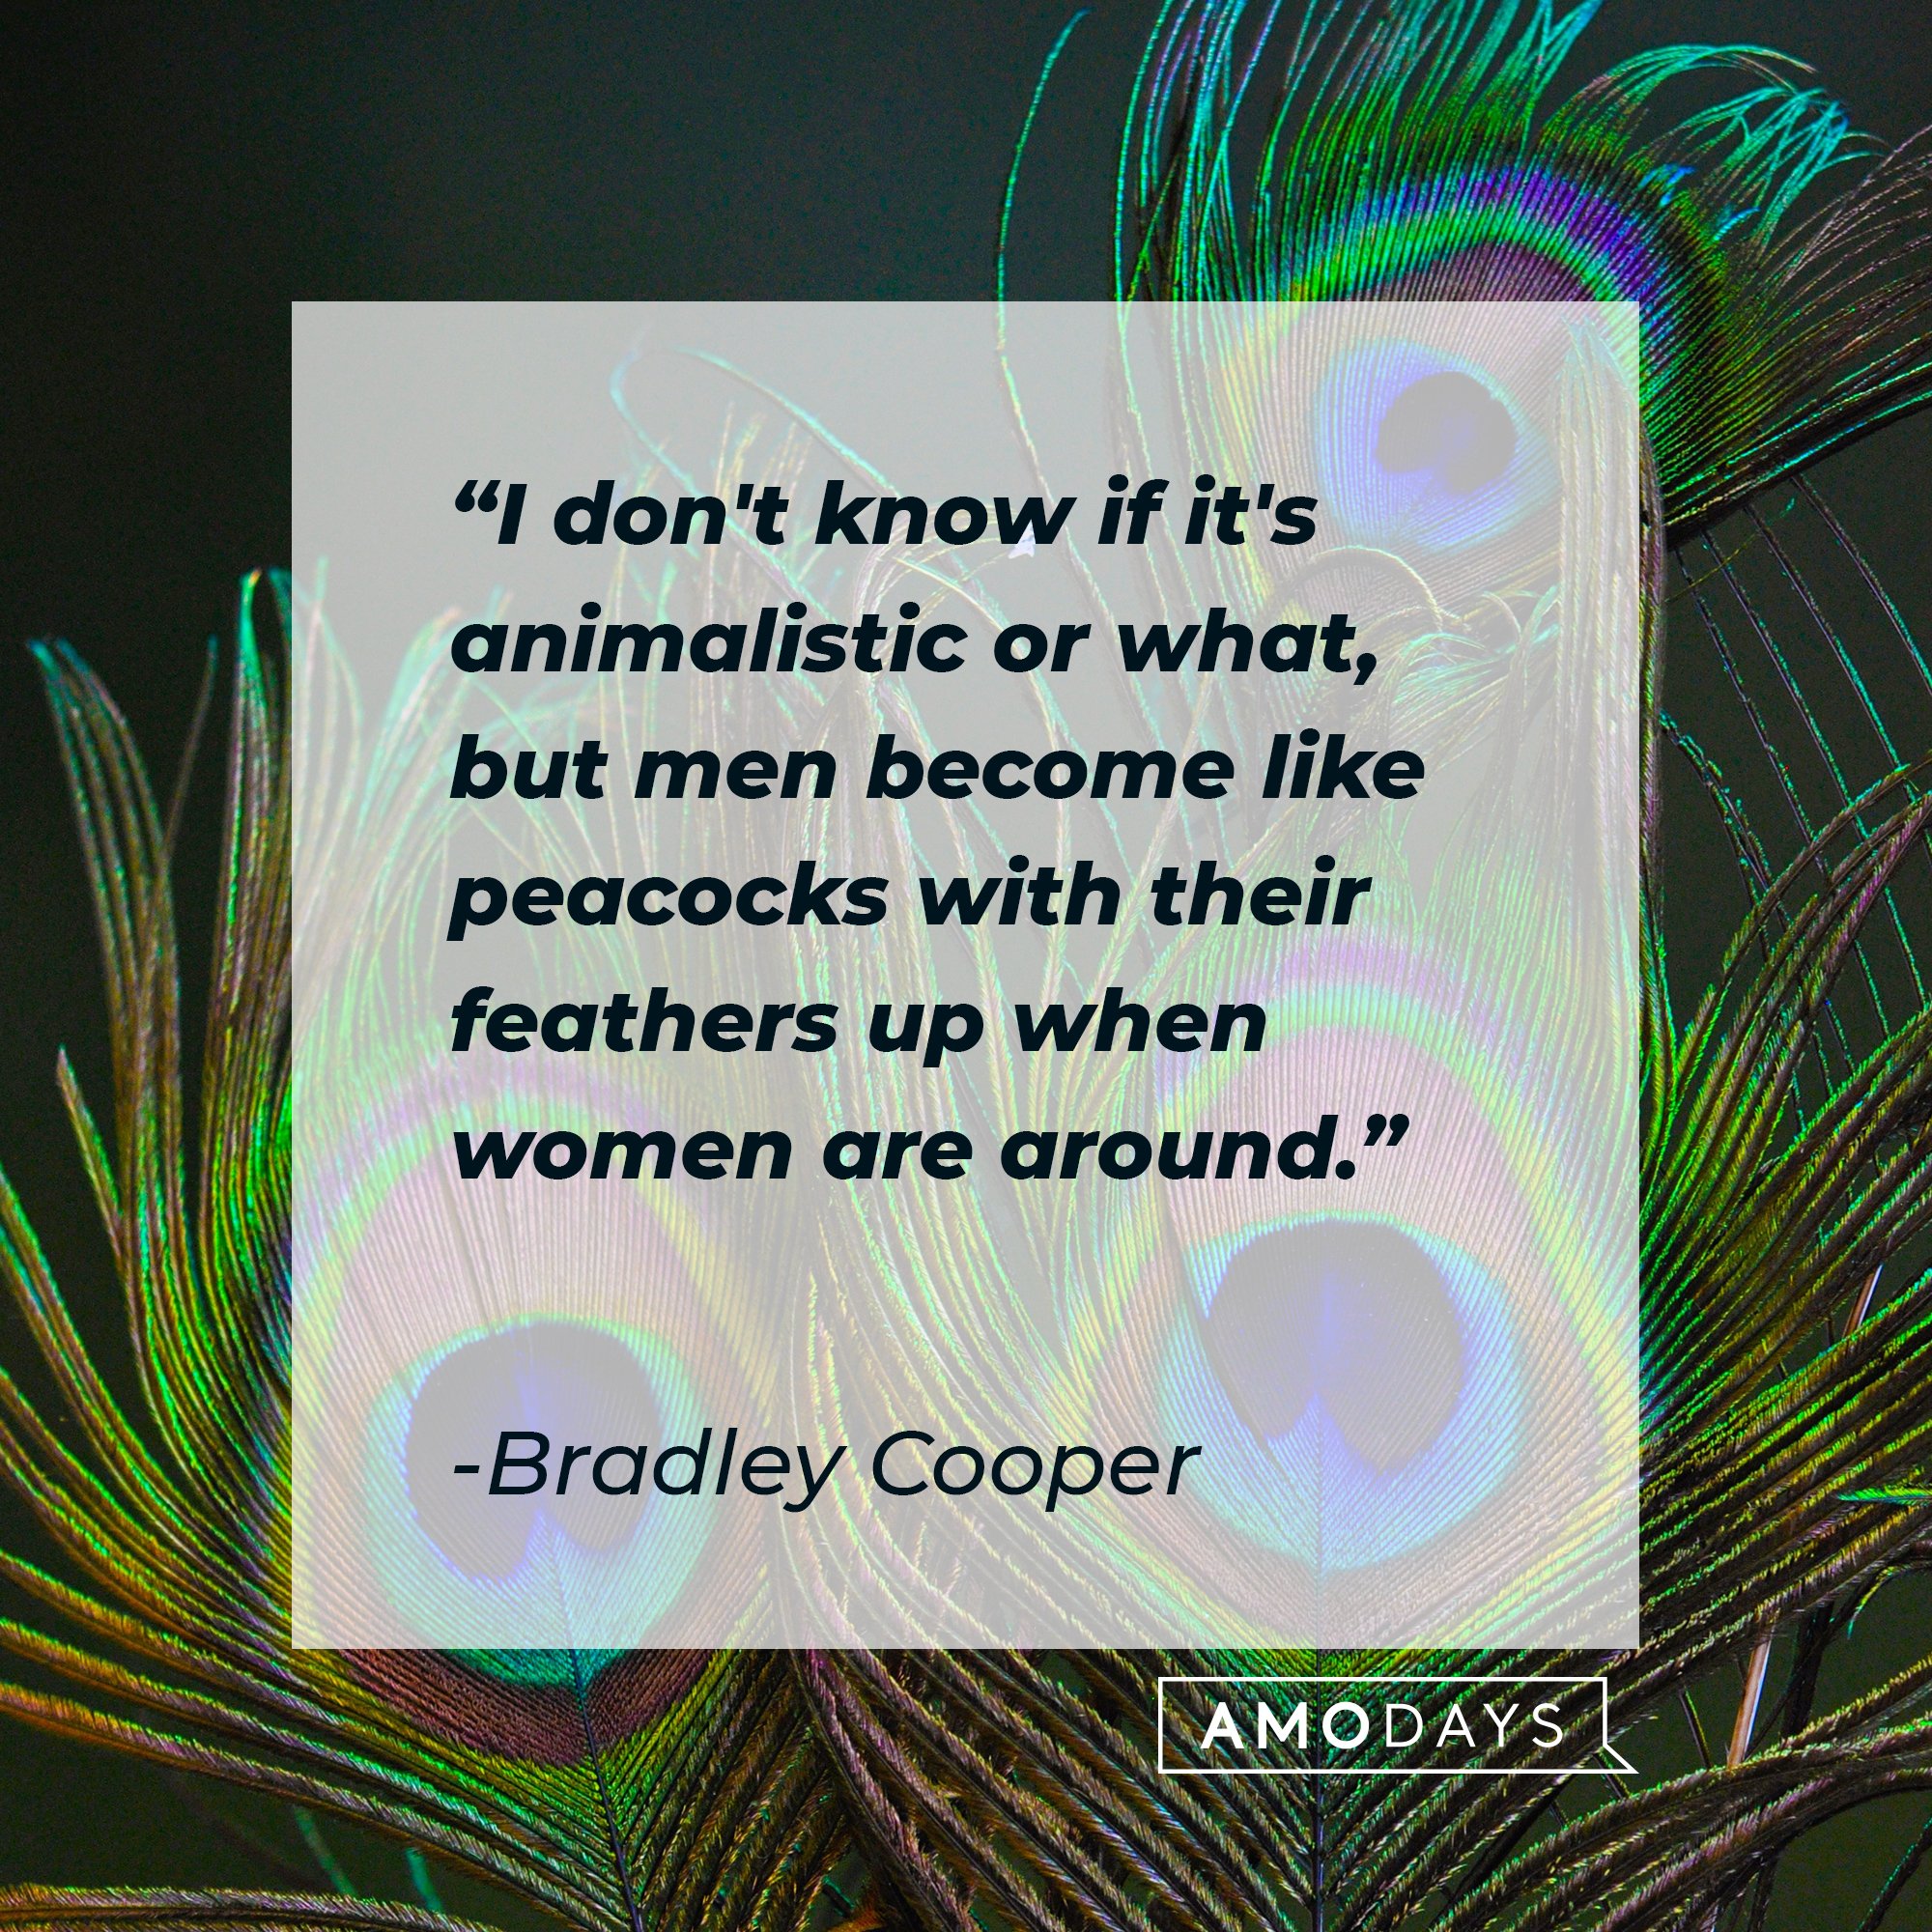  Bradley Cooper's quote: "I don't know if it's animalistic or what, but men become like peacocks with their feathers up when women are around." | Image: AmoDays